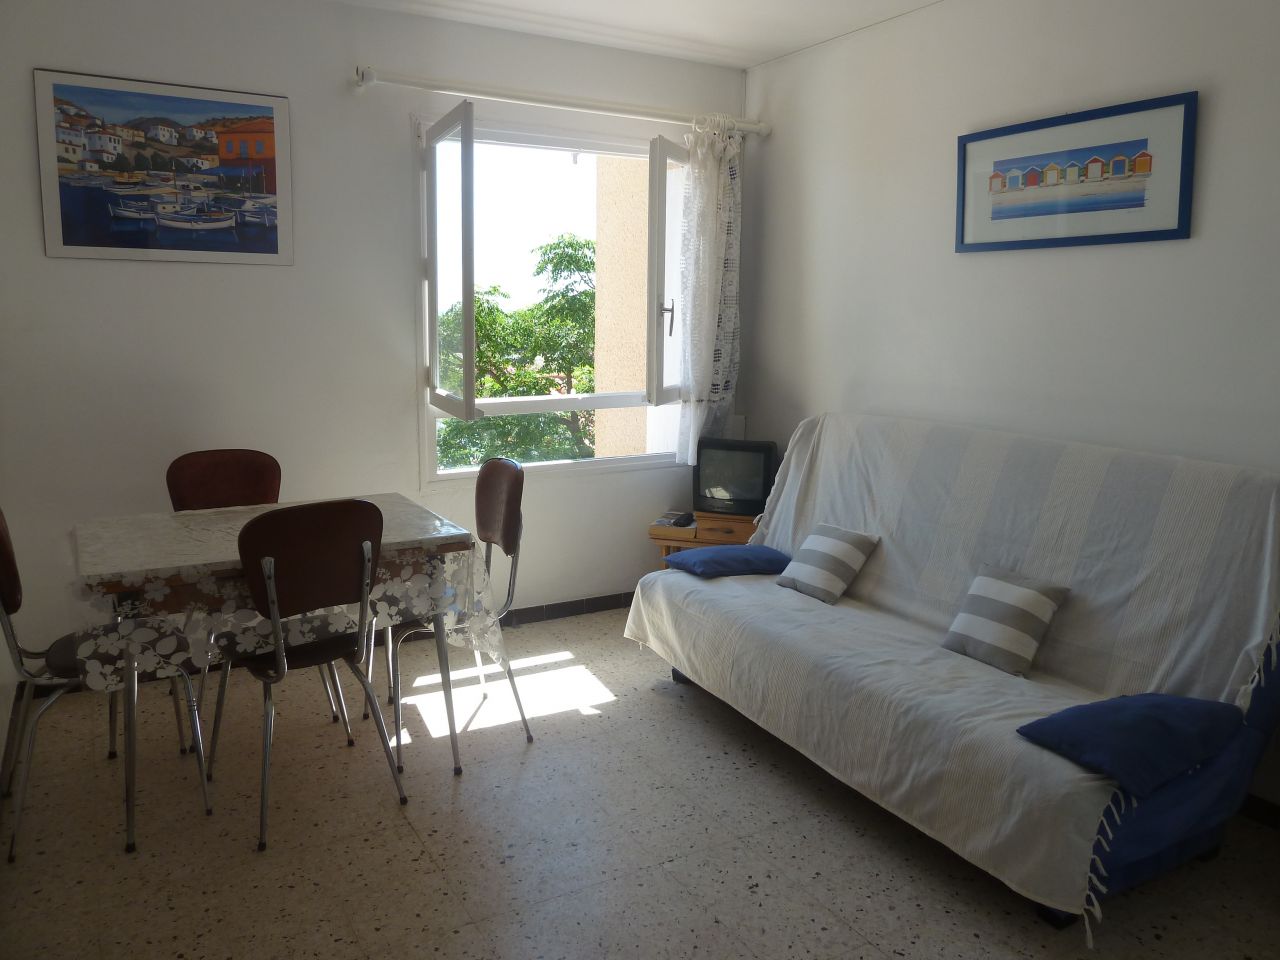 Location appartement Le Baracrs N°2365 image 2